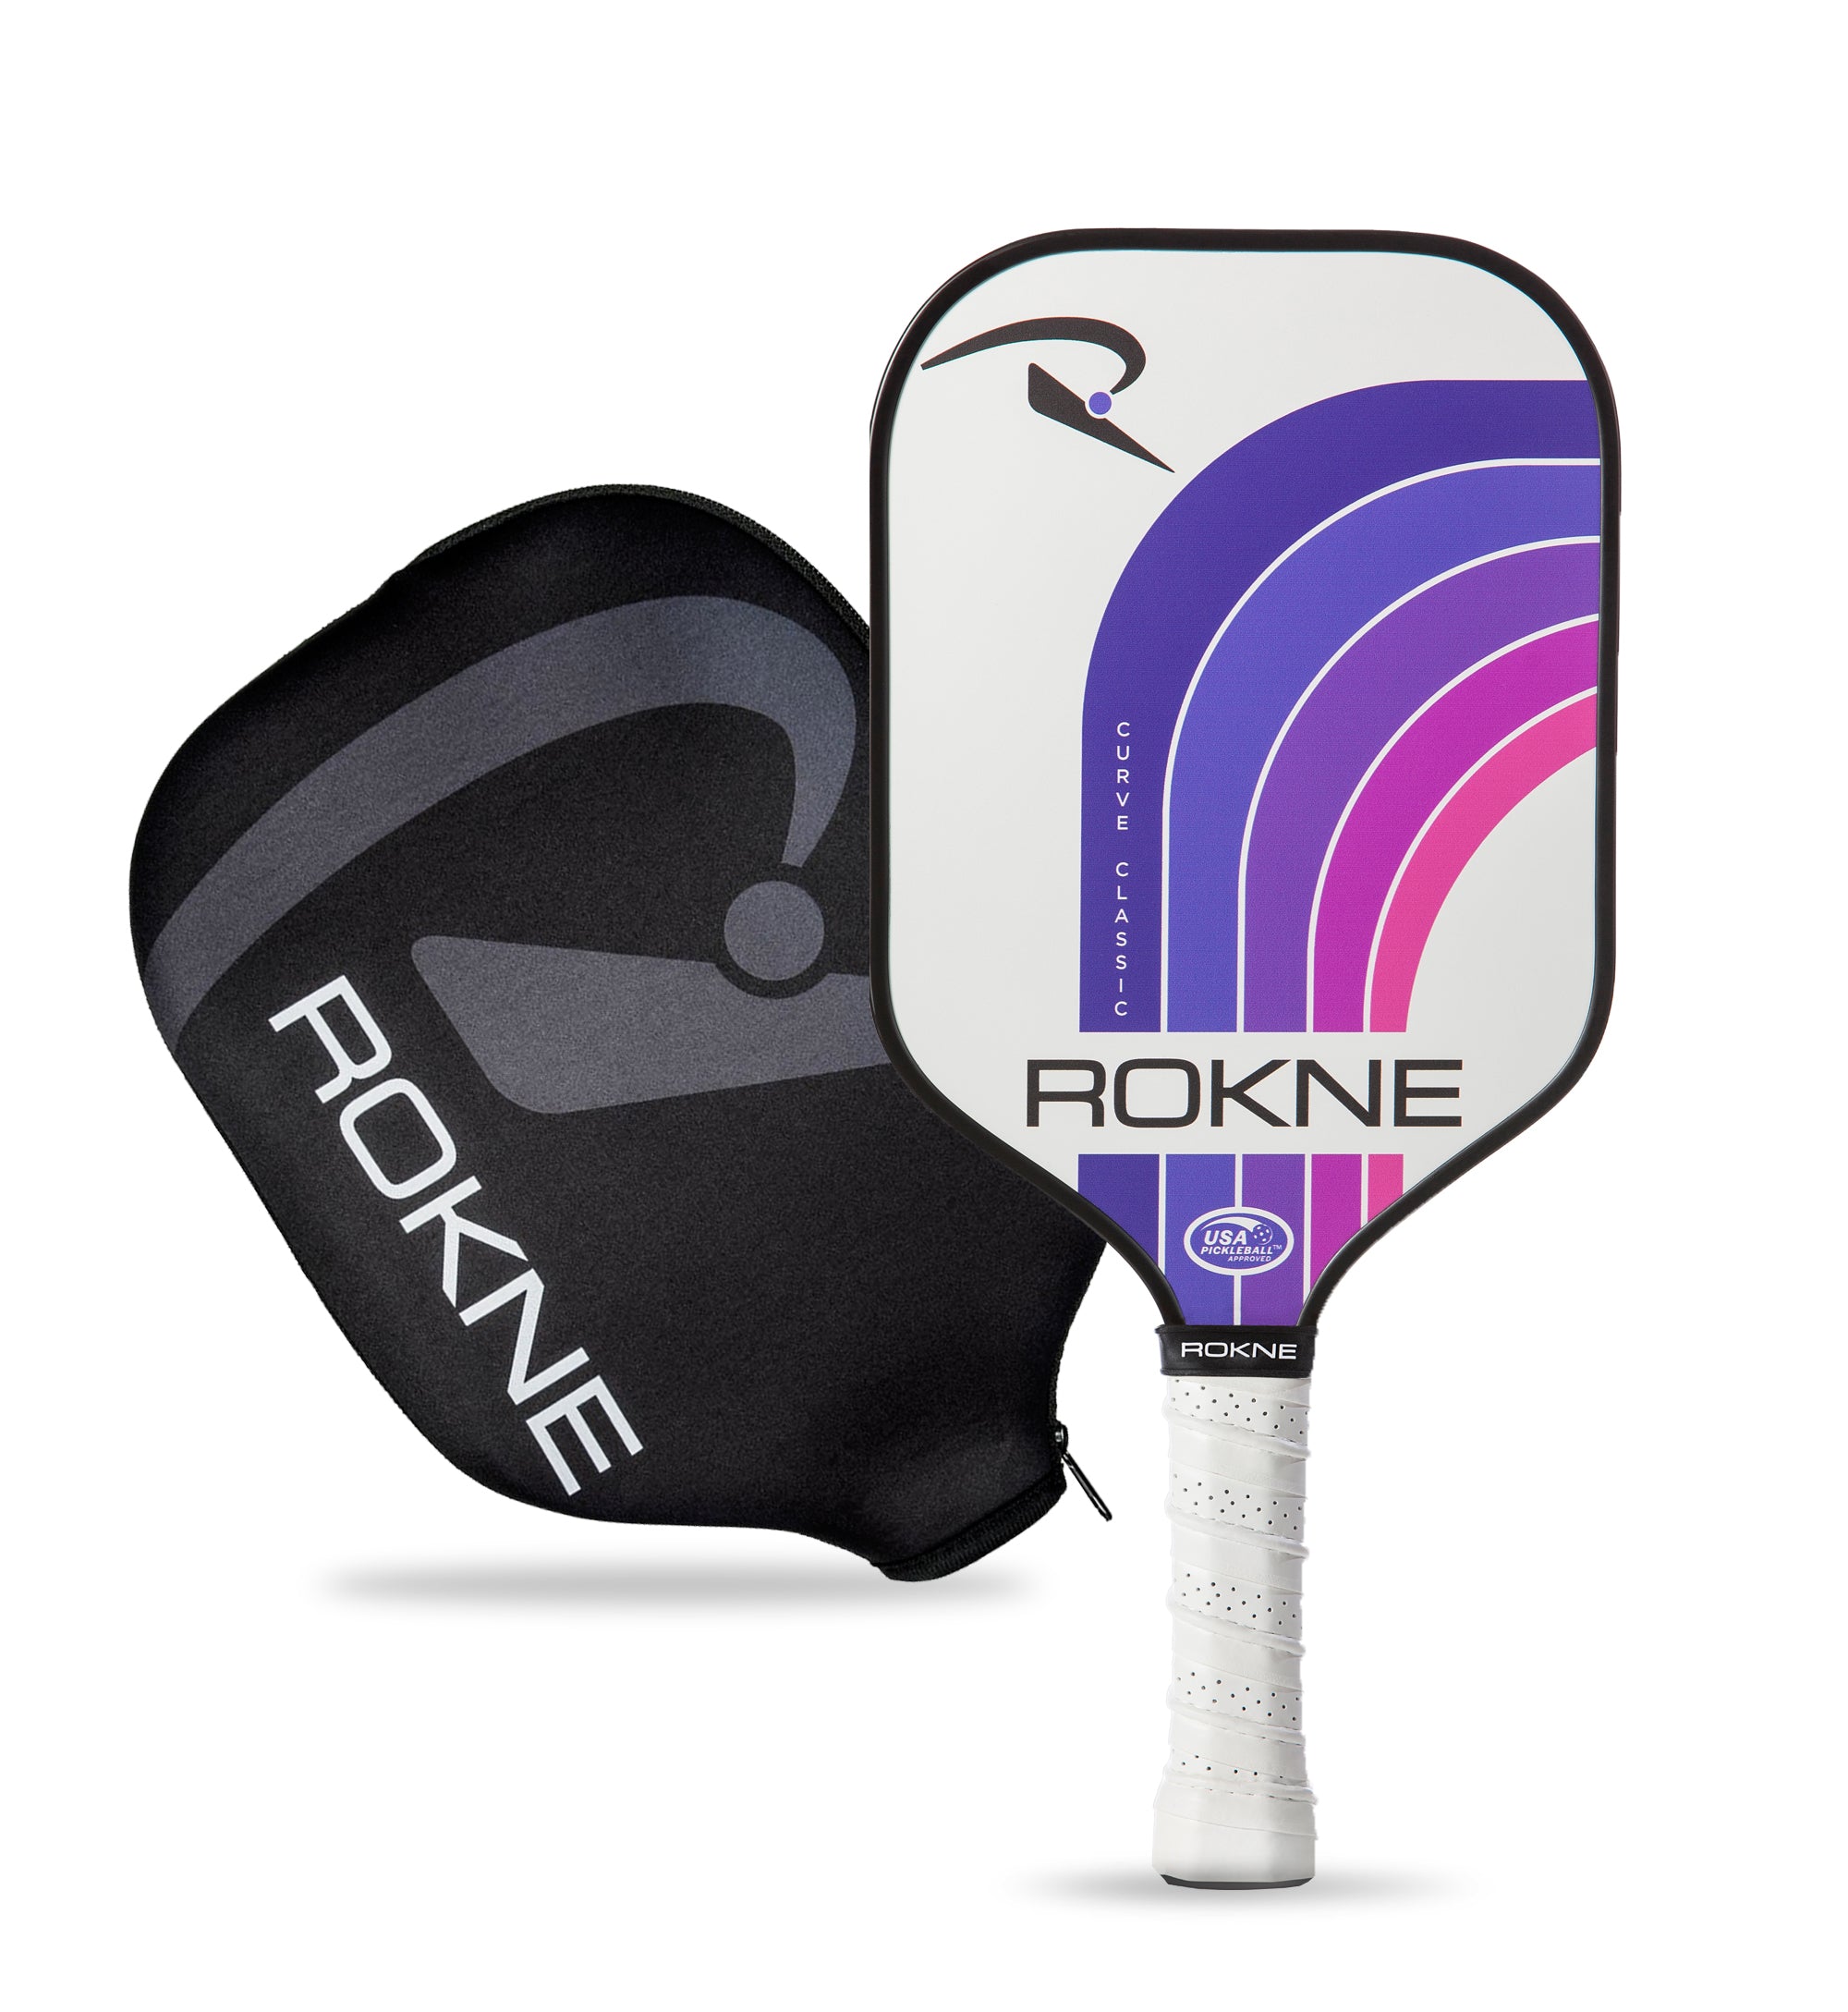 ROKNE Curve Classic Pickleball Paddle - Northern Sky (Paddle Cover Included)